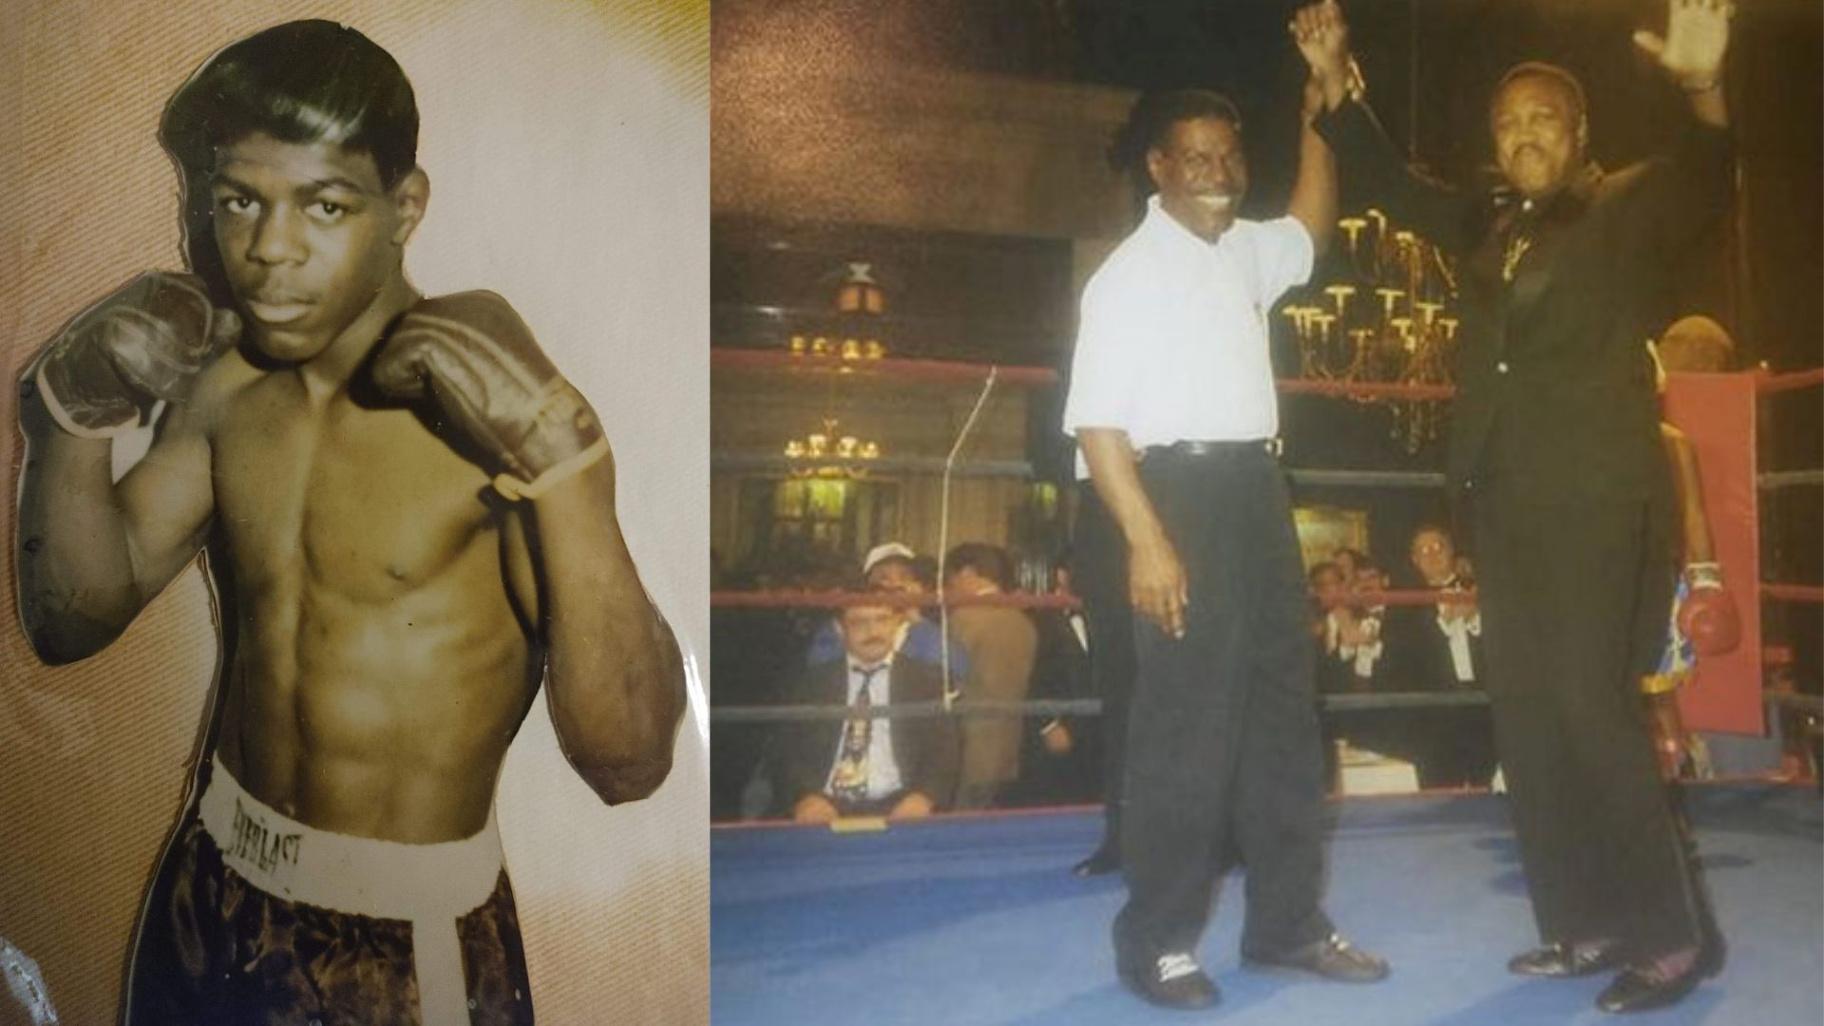 In 1973, tim adams won the triple crown. Adams continued to fight, building a decades-long career as a boxing referee. (contributed by tim adams)